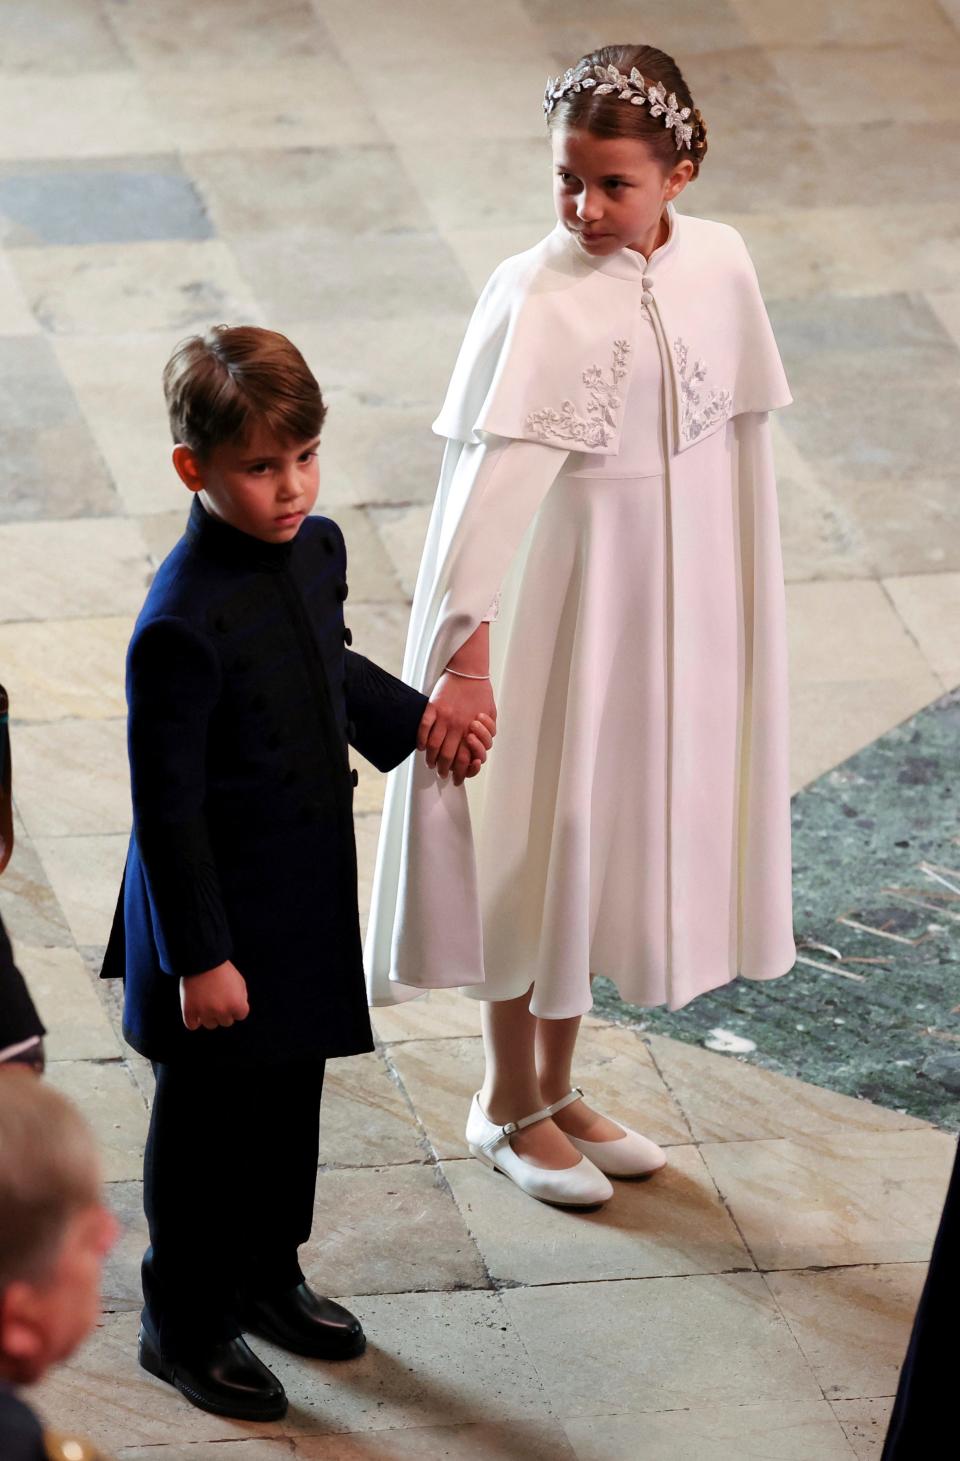 Britain's Prince George and Princess Charlotte arrive at the coronation of King Charles III at Westminster Abbey, London, Saturday, May 6, 2023.